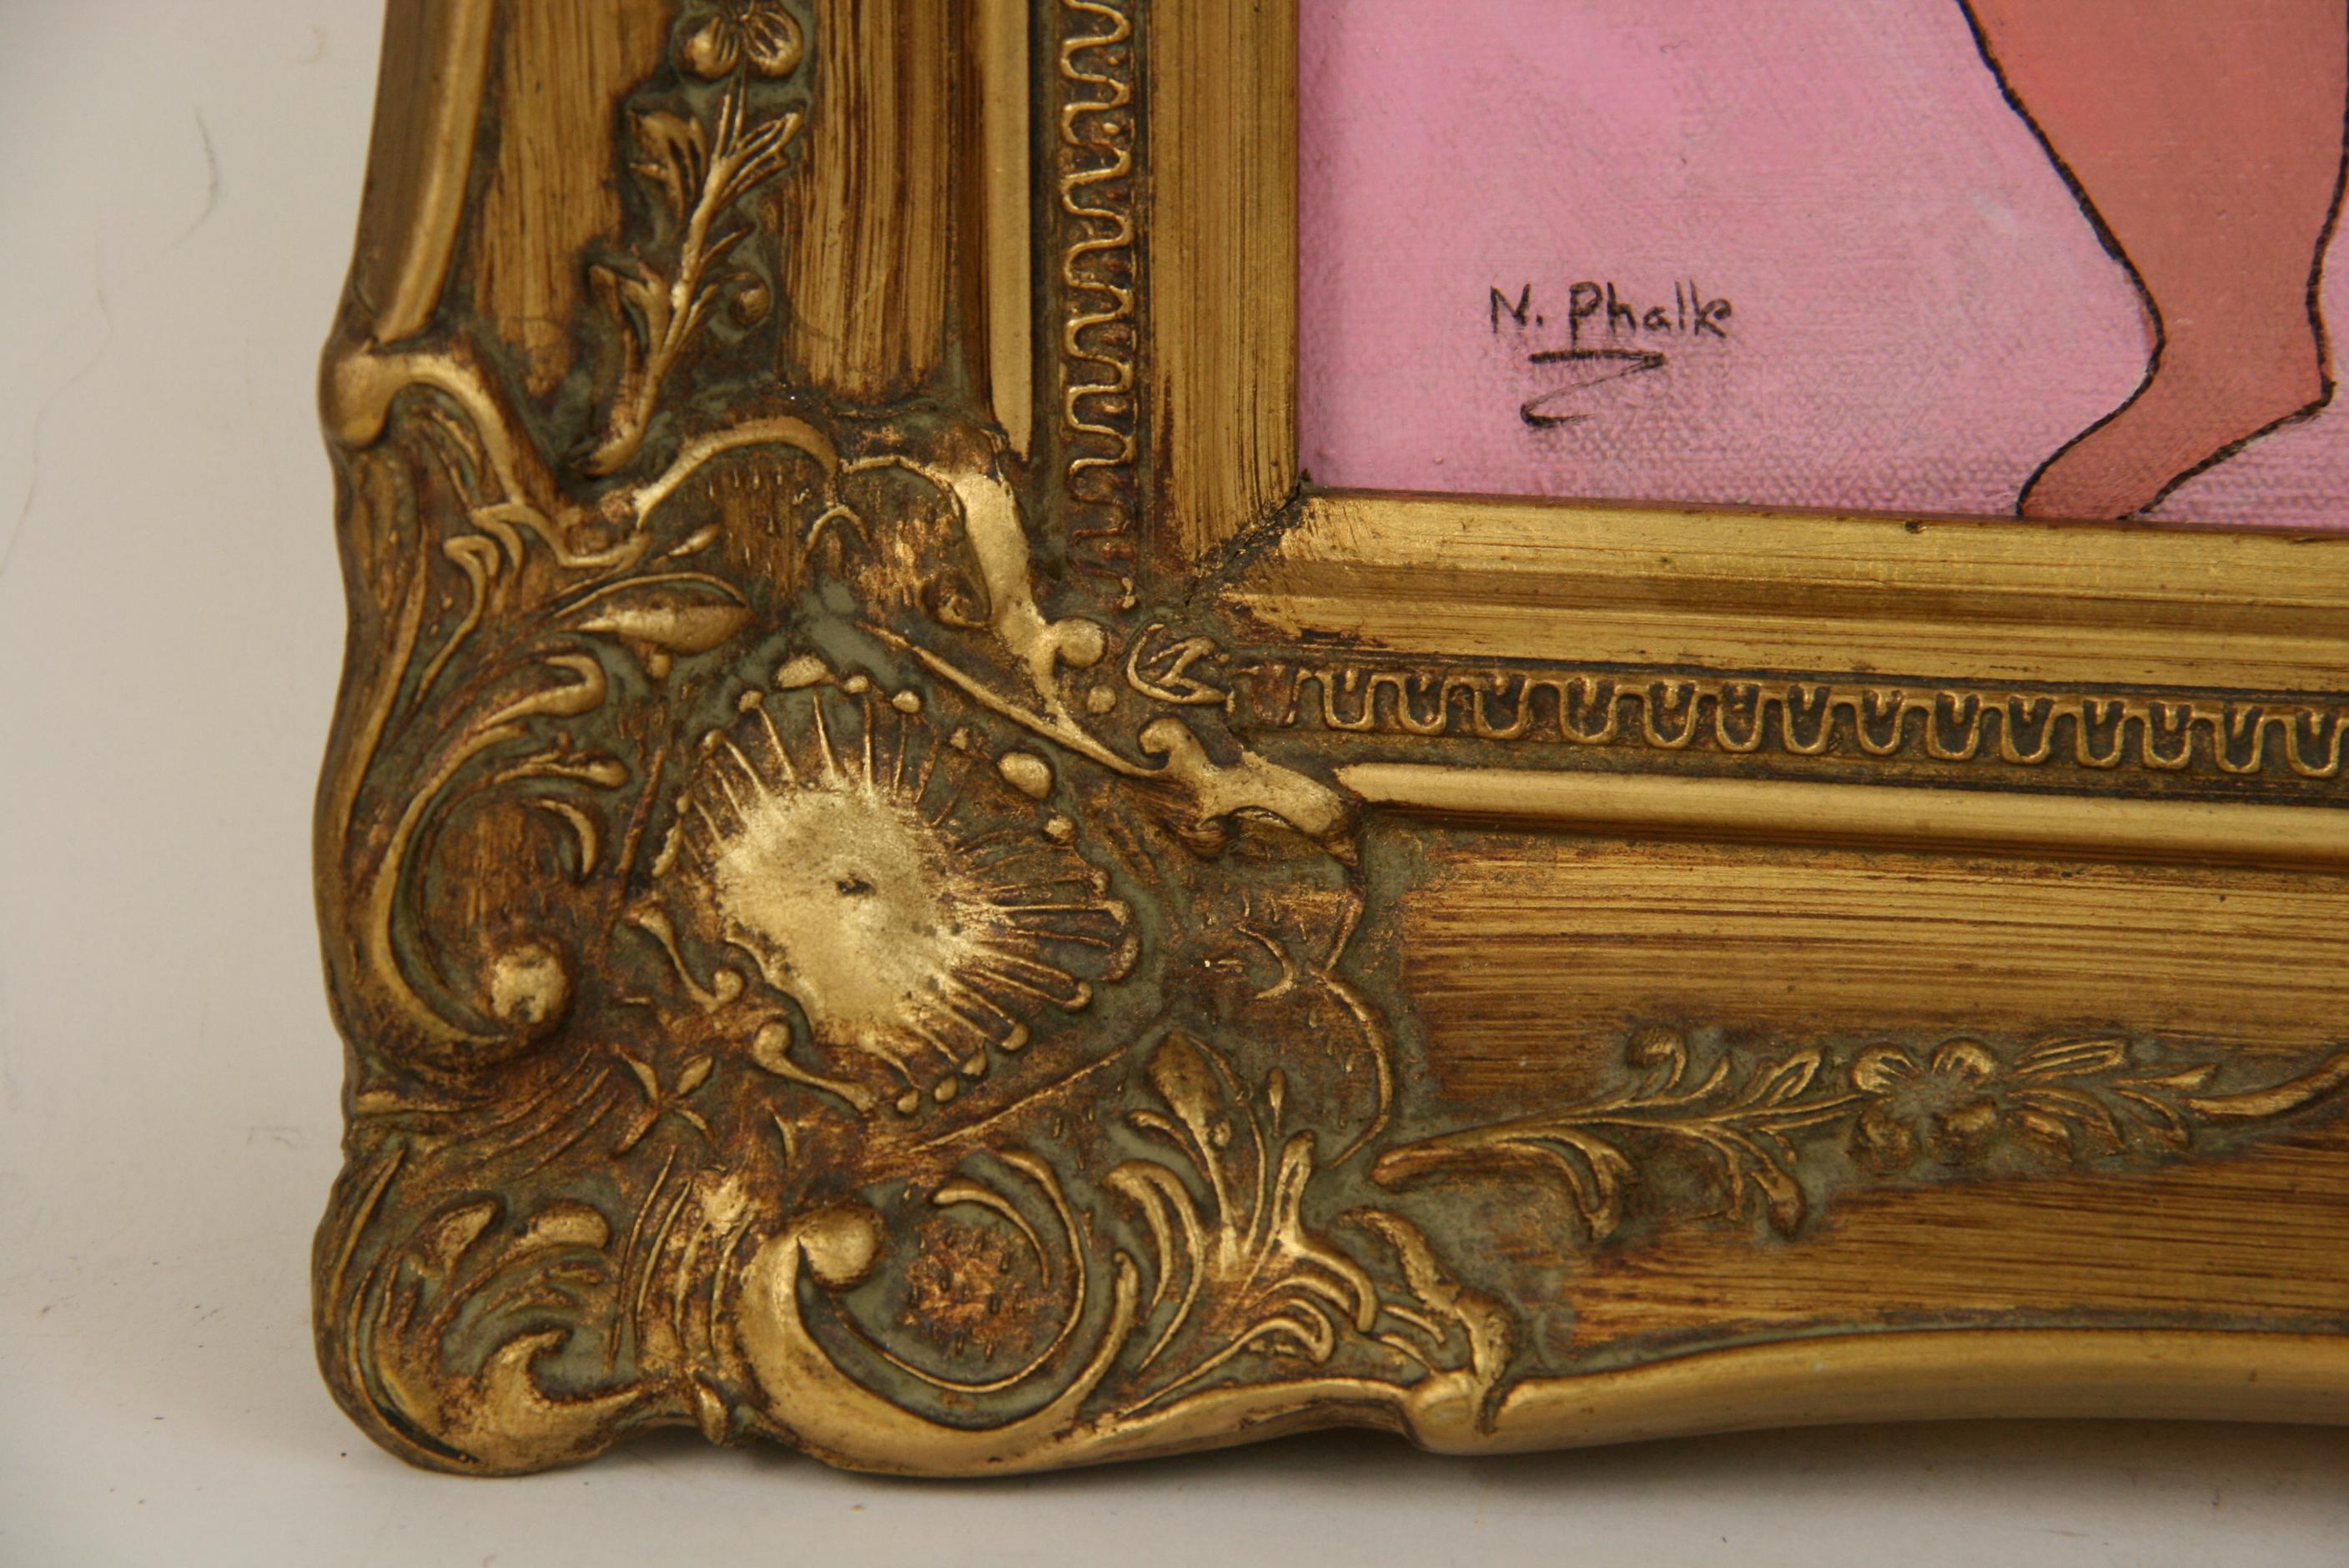 5-3378 Acrylic on artist board
Set in an ornate gilt wood frame
.Image size 9.5x7.5